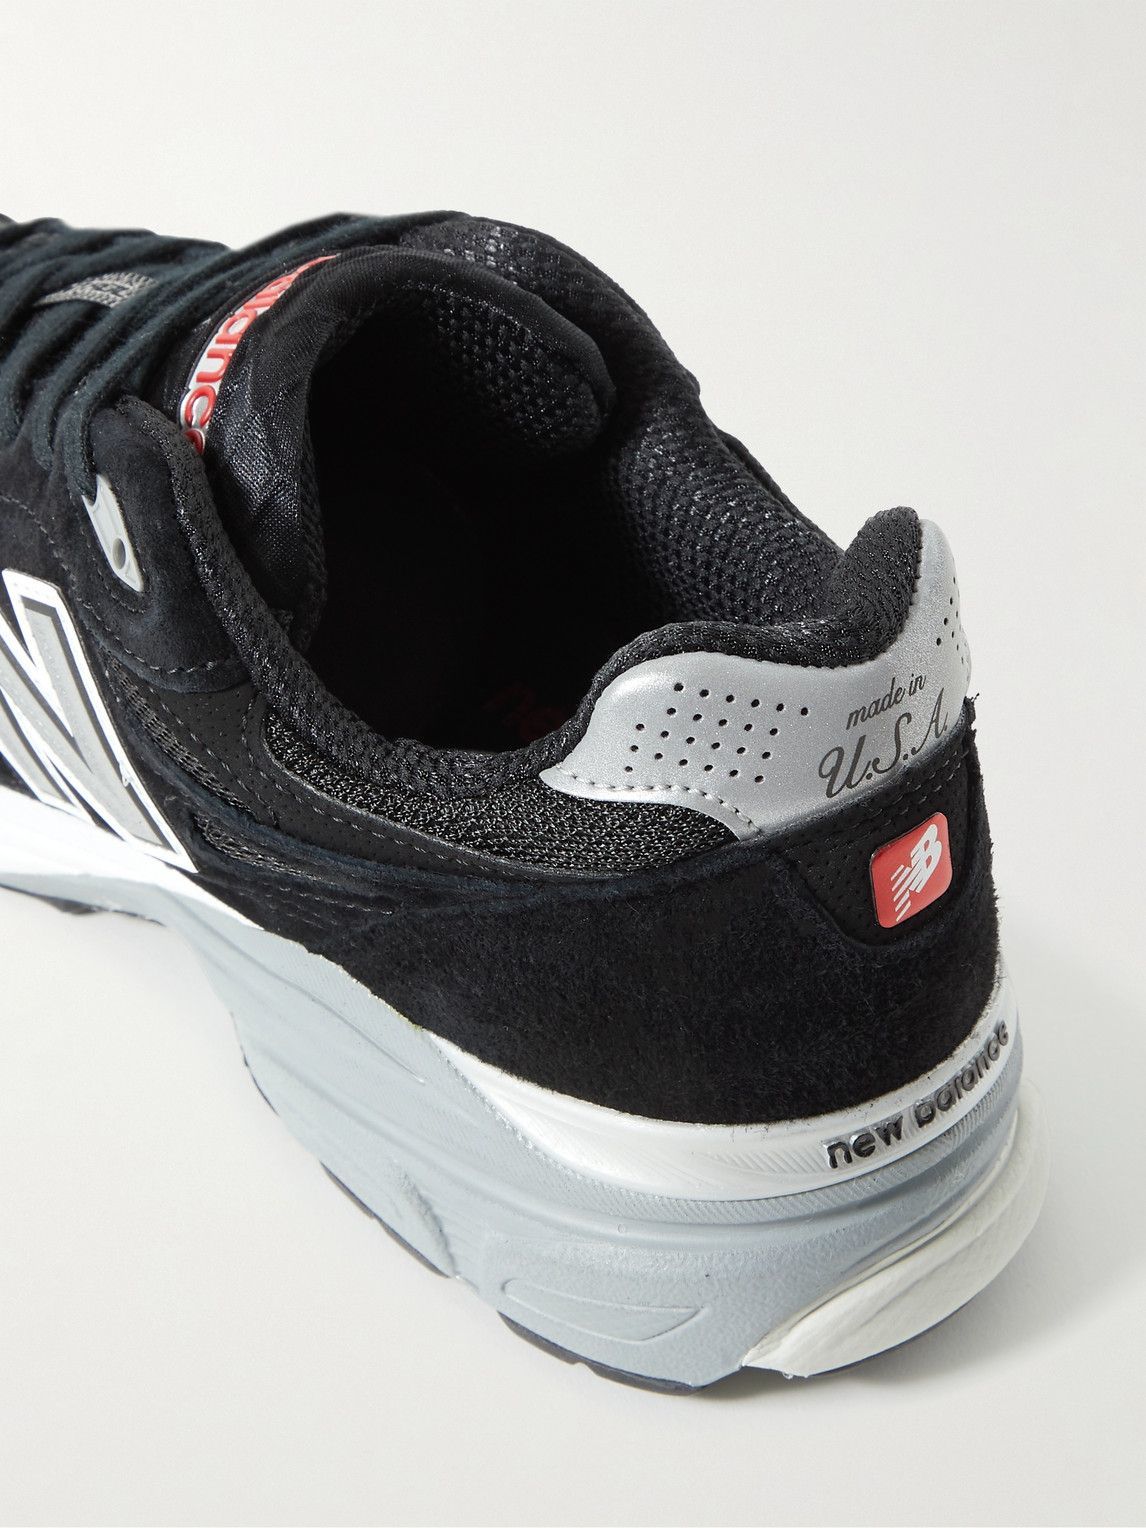 New Balance - 990v3 Suede and Mesh Sneakers - Black